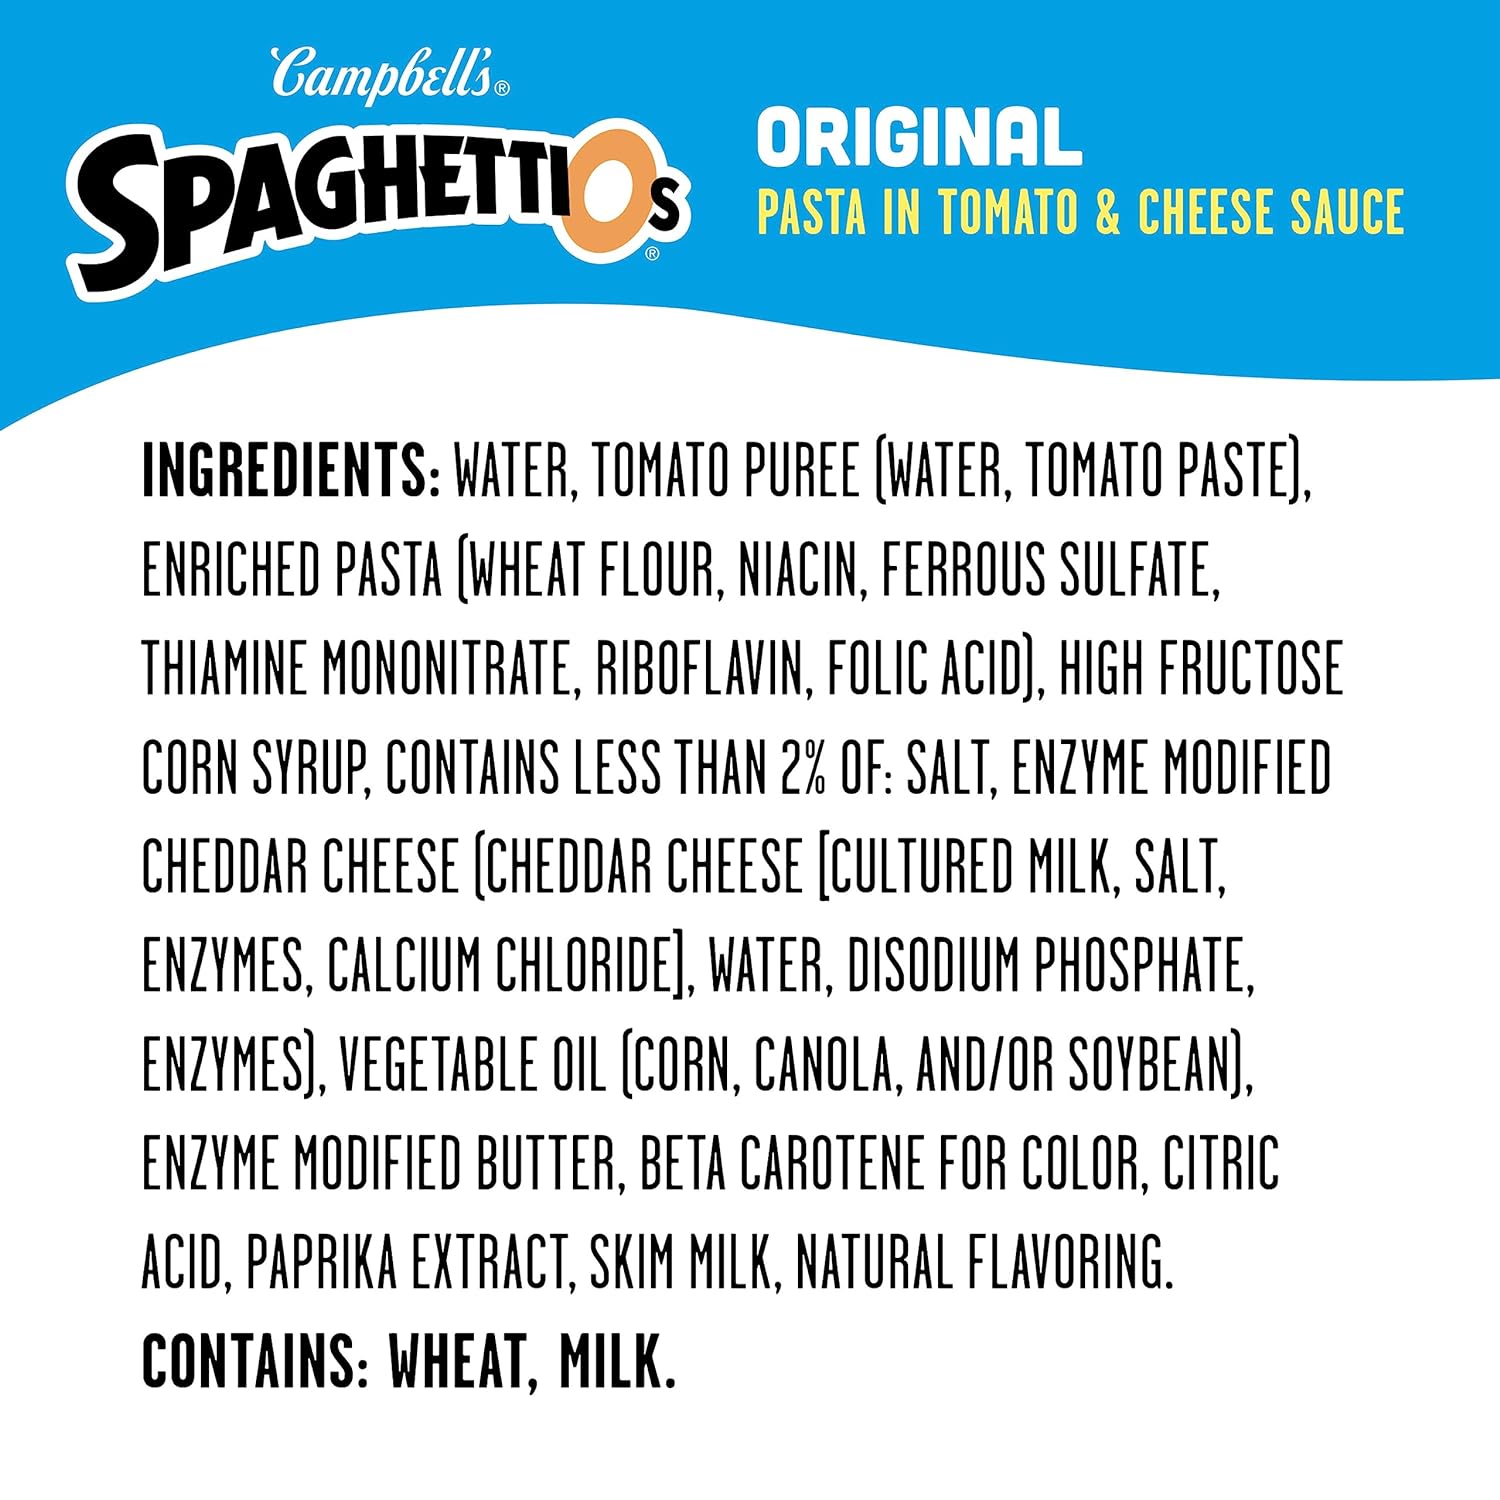 SpaghettiOs Original Canned Pasta, 22.4 oz Can : Grocery & Gourmet Food